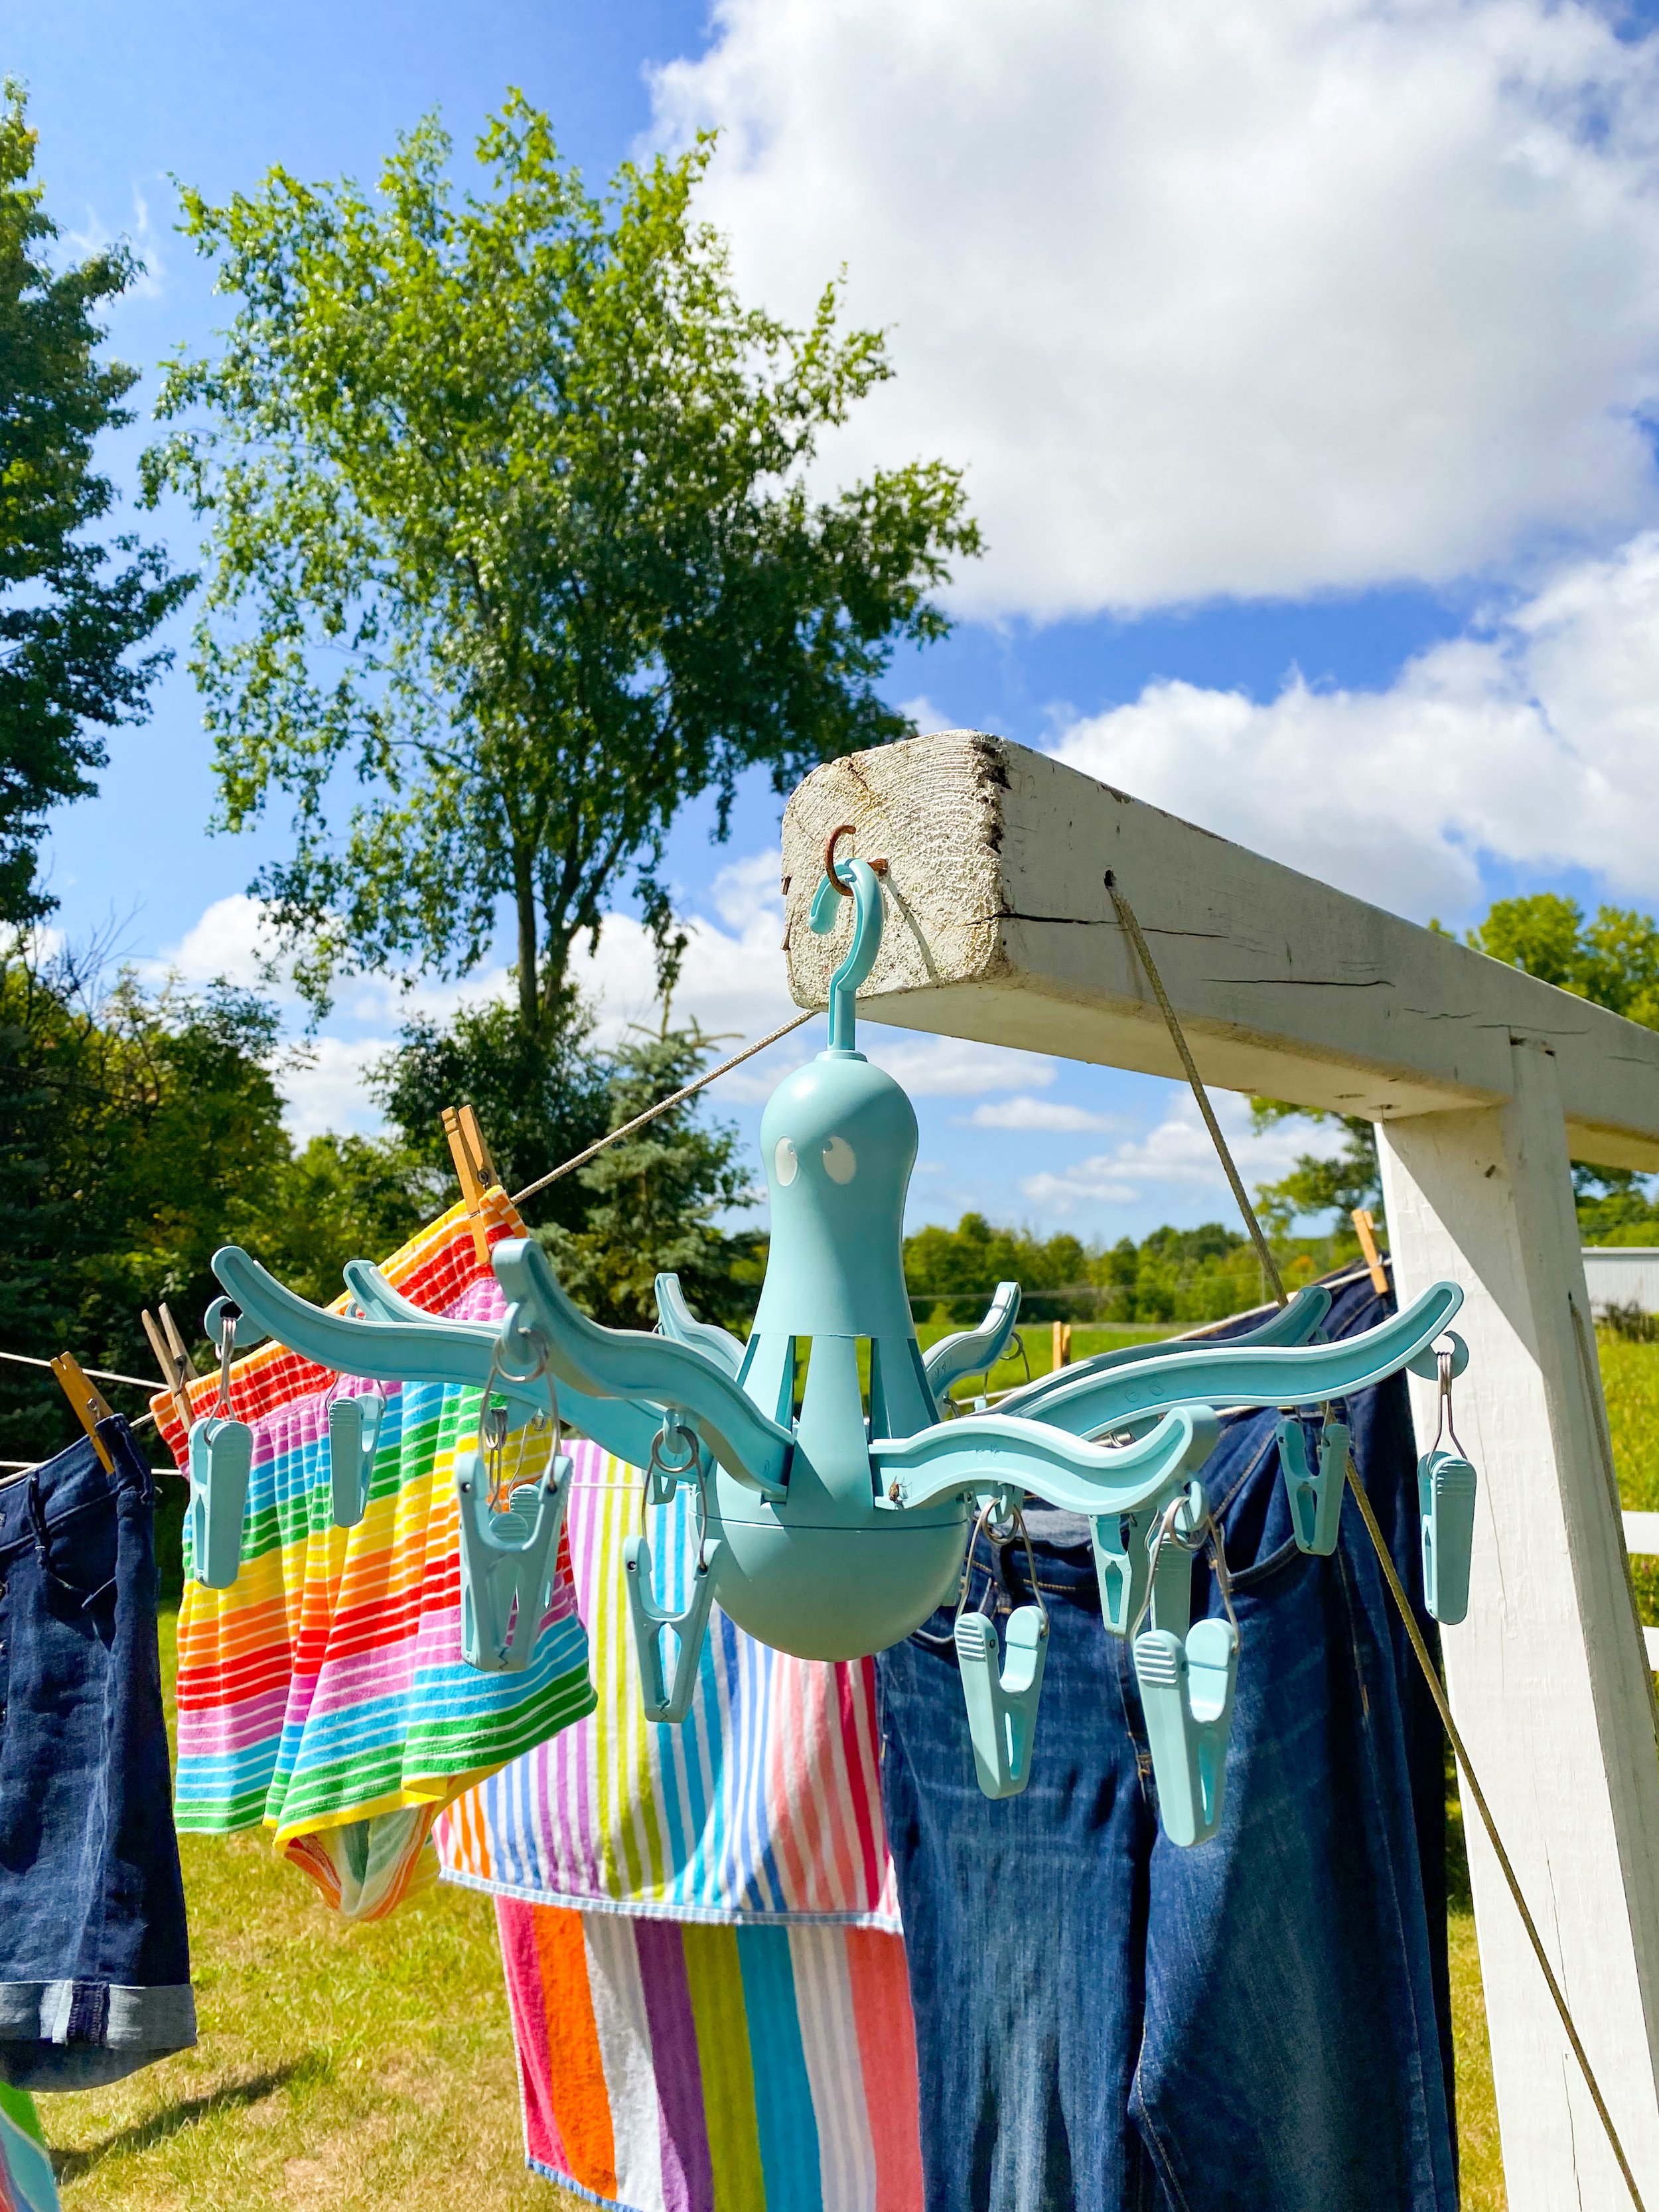 Drying Laundry the Vintage Way - How to Use a Clothesline — Emily Retro -  Vintage and DIY Home Design